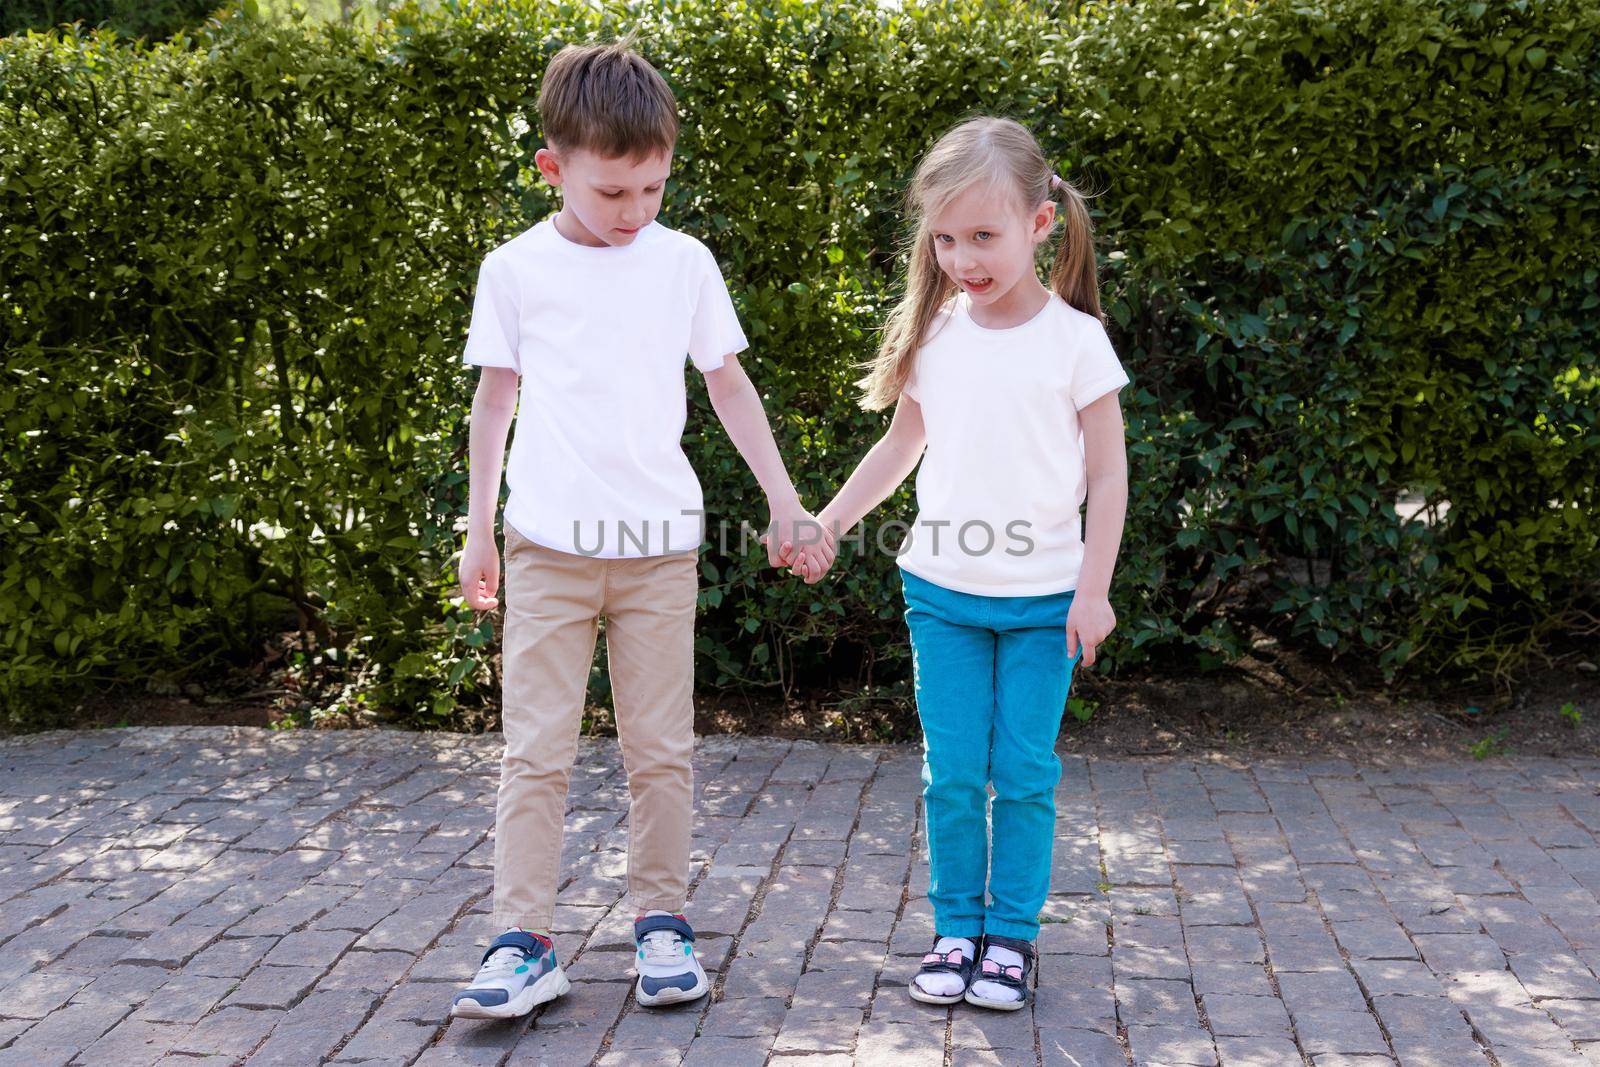 Mockup, pattern template for white t-shirt. Placement of logo, print on children's summer clothes, sports uniforms, school clothes. Natural, natural background, summer sunny day. children in the park